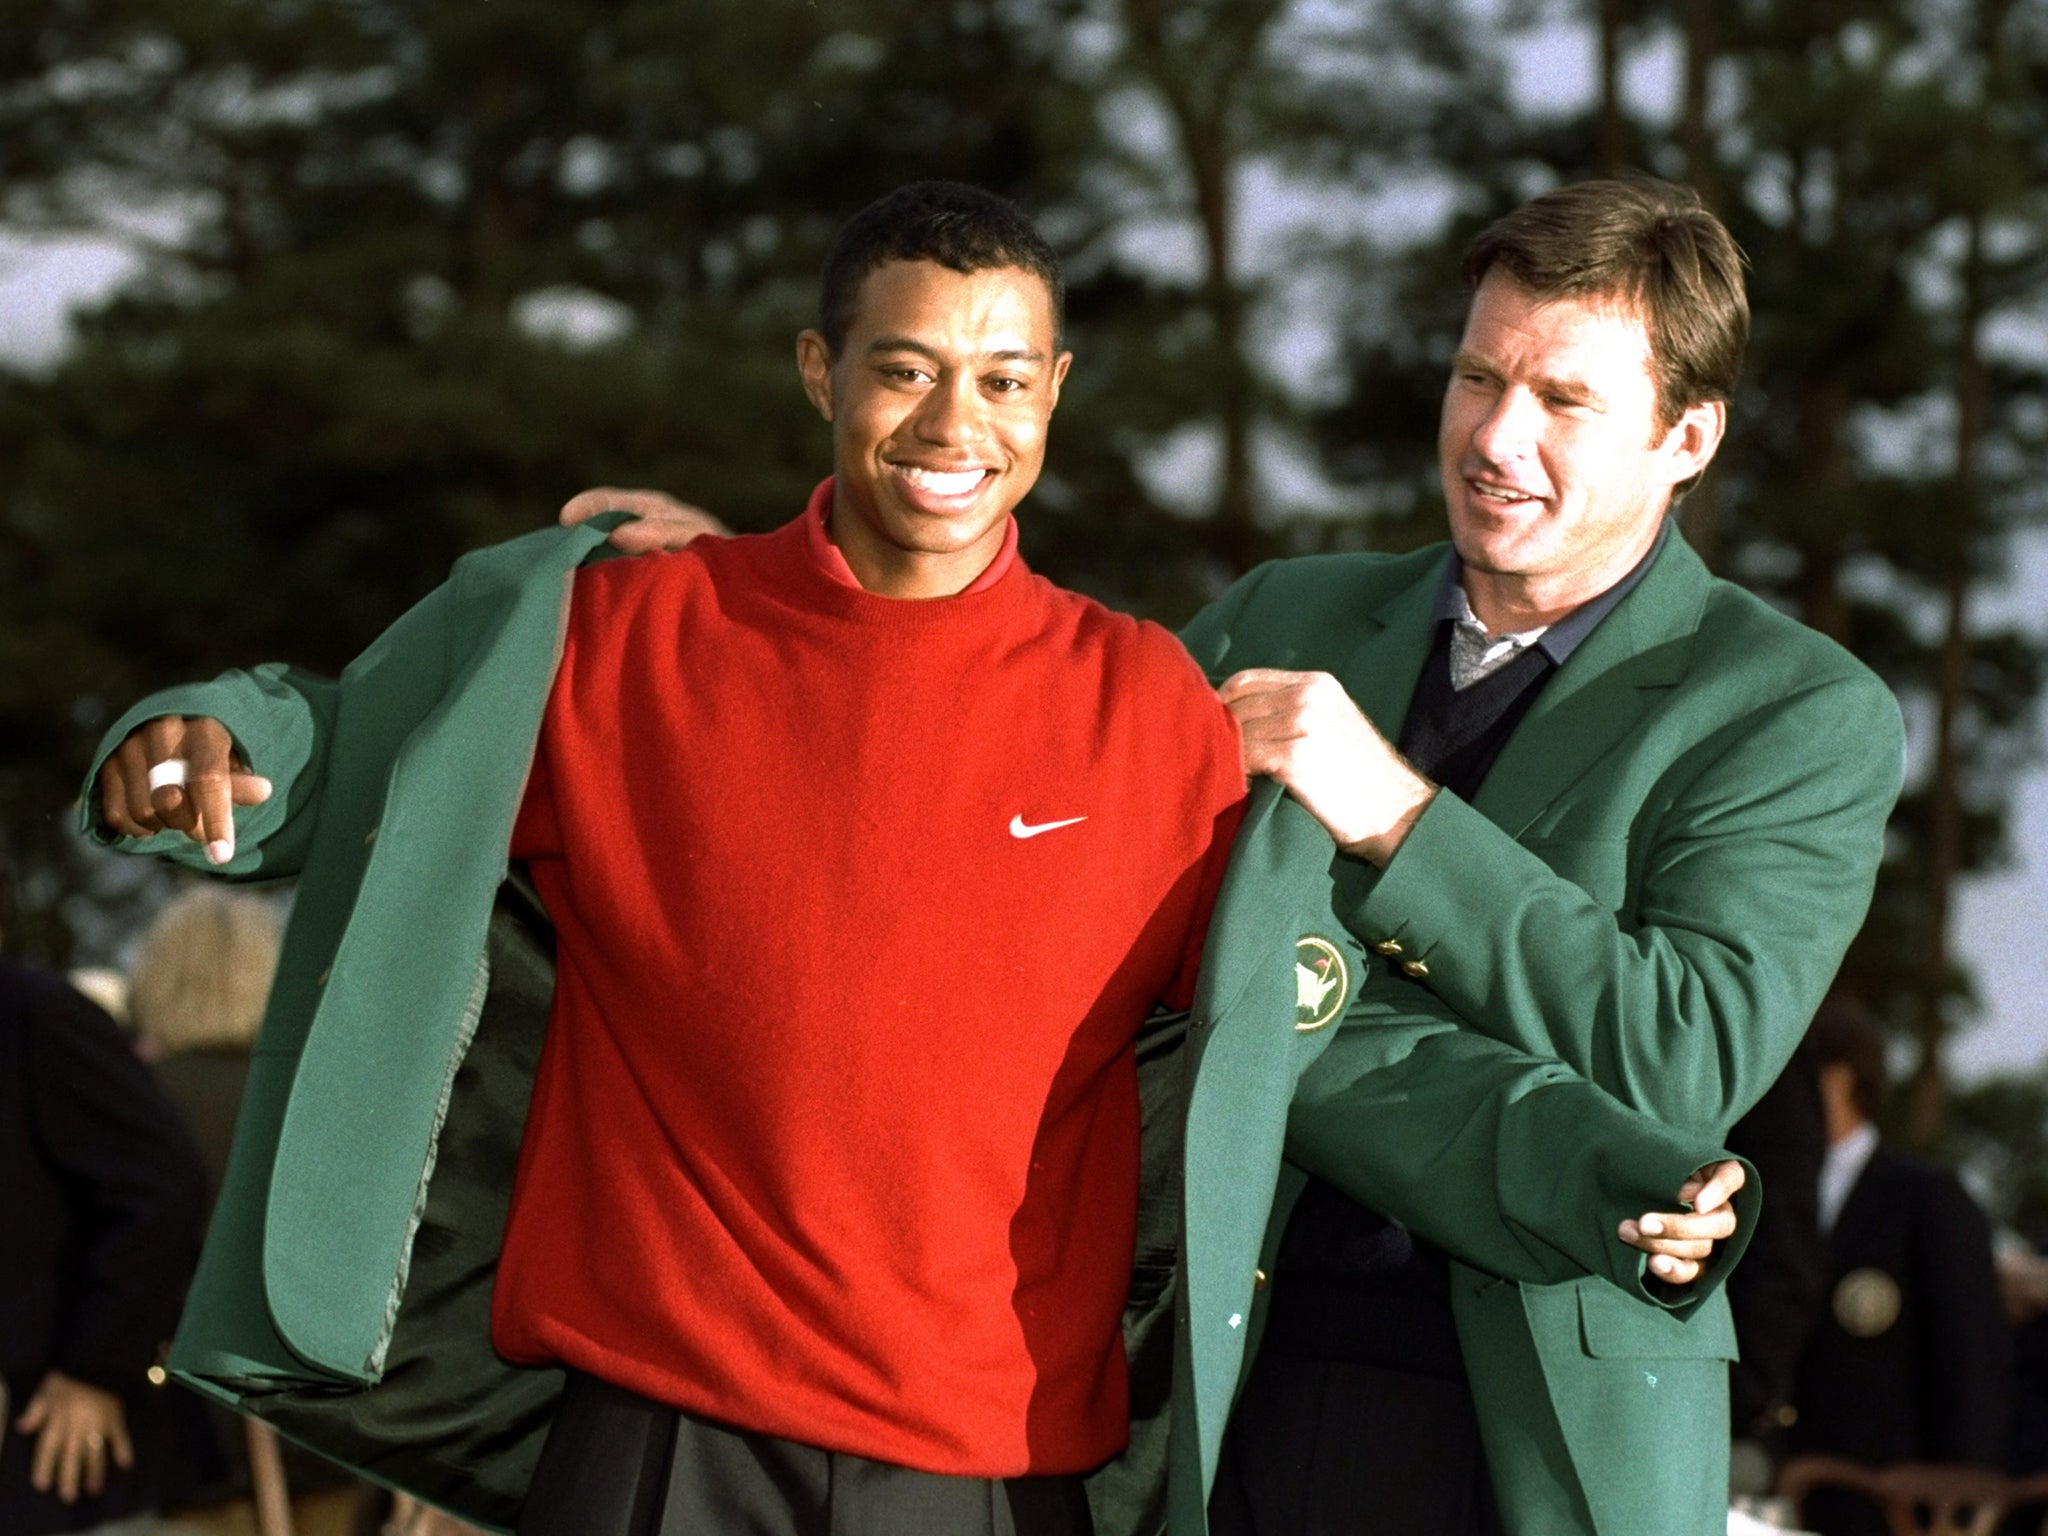 Tiger Woods receives his green jacket after winning the Masters tournament in 1997